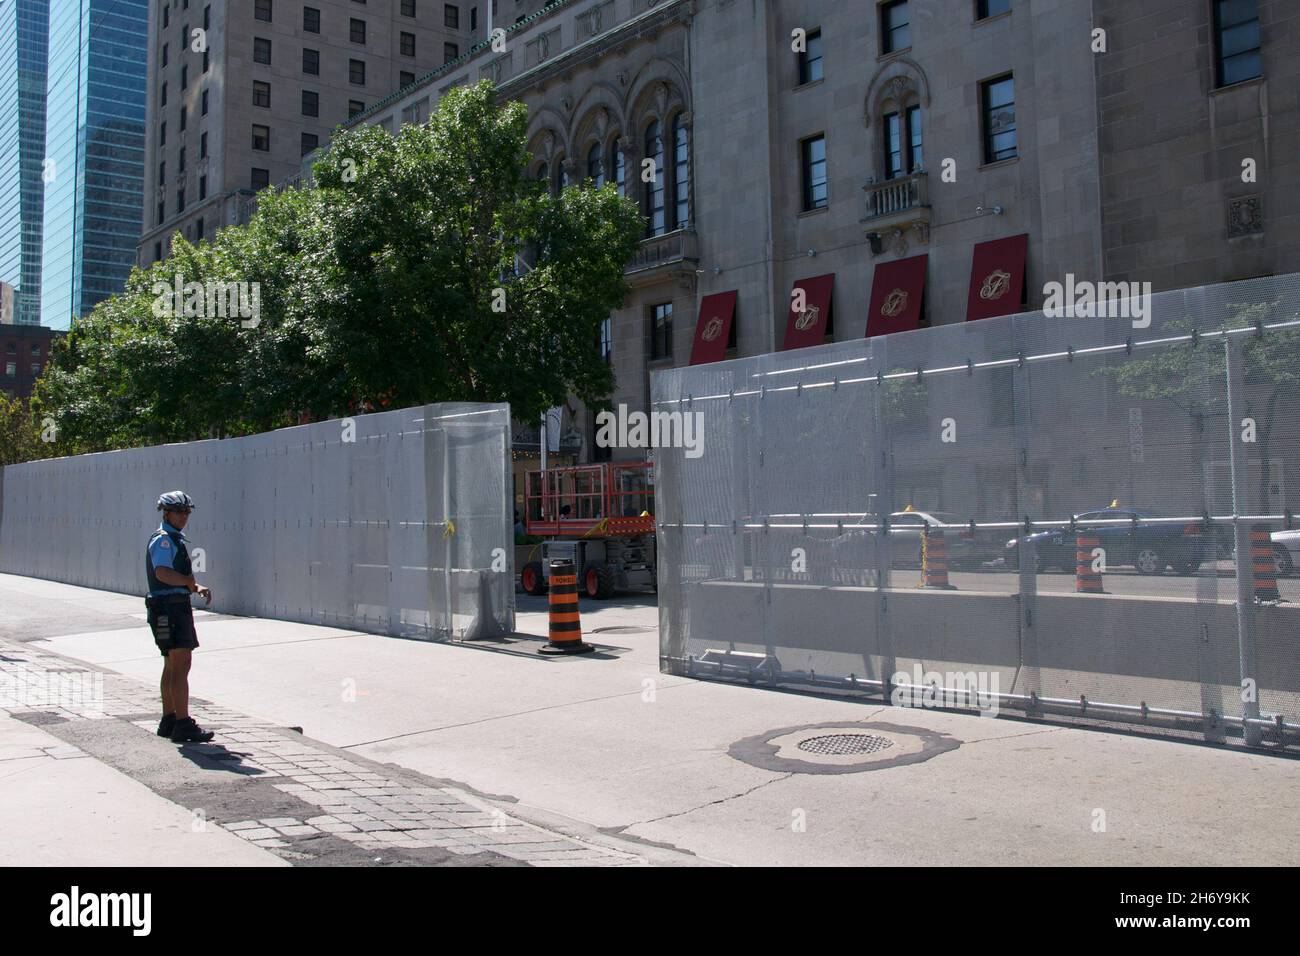 Toronto, Ontario, Kanada - 06/21/2010: Crowd Control Barriers use as part of Crown Management Planning in G-20 Stockfoto